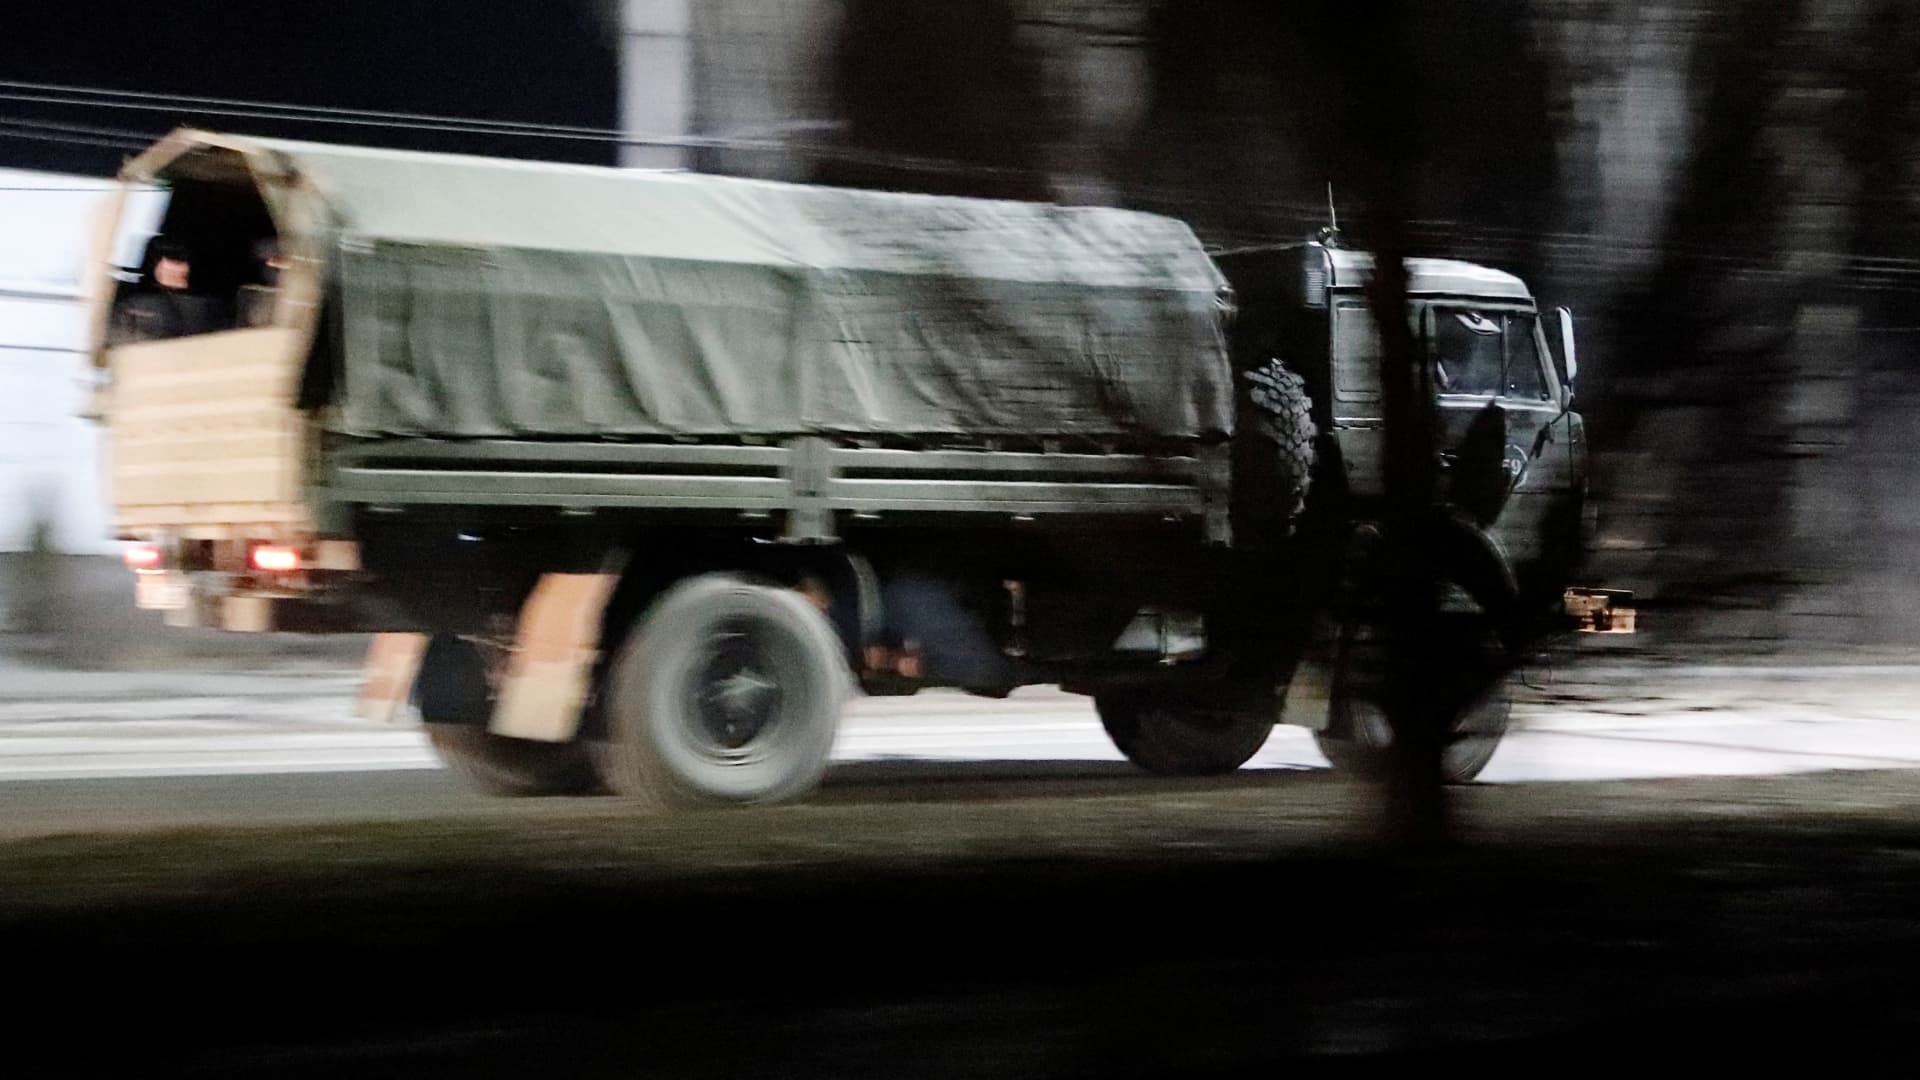 A military truck drives along a street after Russian President Vladimir Putin ordered the deployment of Russian troops to two breakaway regions in eastern Ukraine following the recognition of their independence, in the separatist-controlled city of Donetsk, Ukraine February 22, 2022.